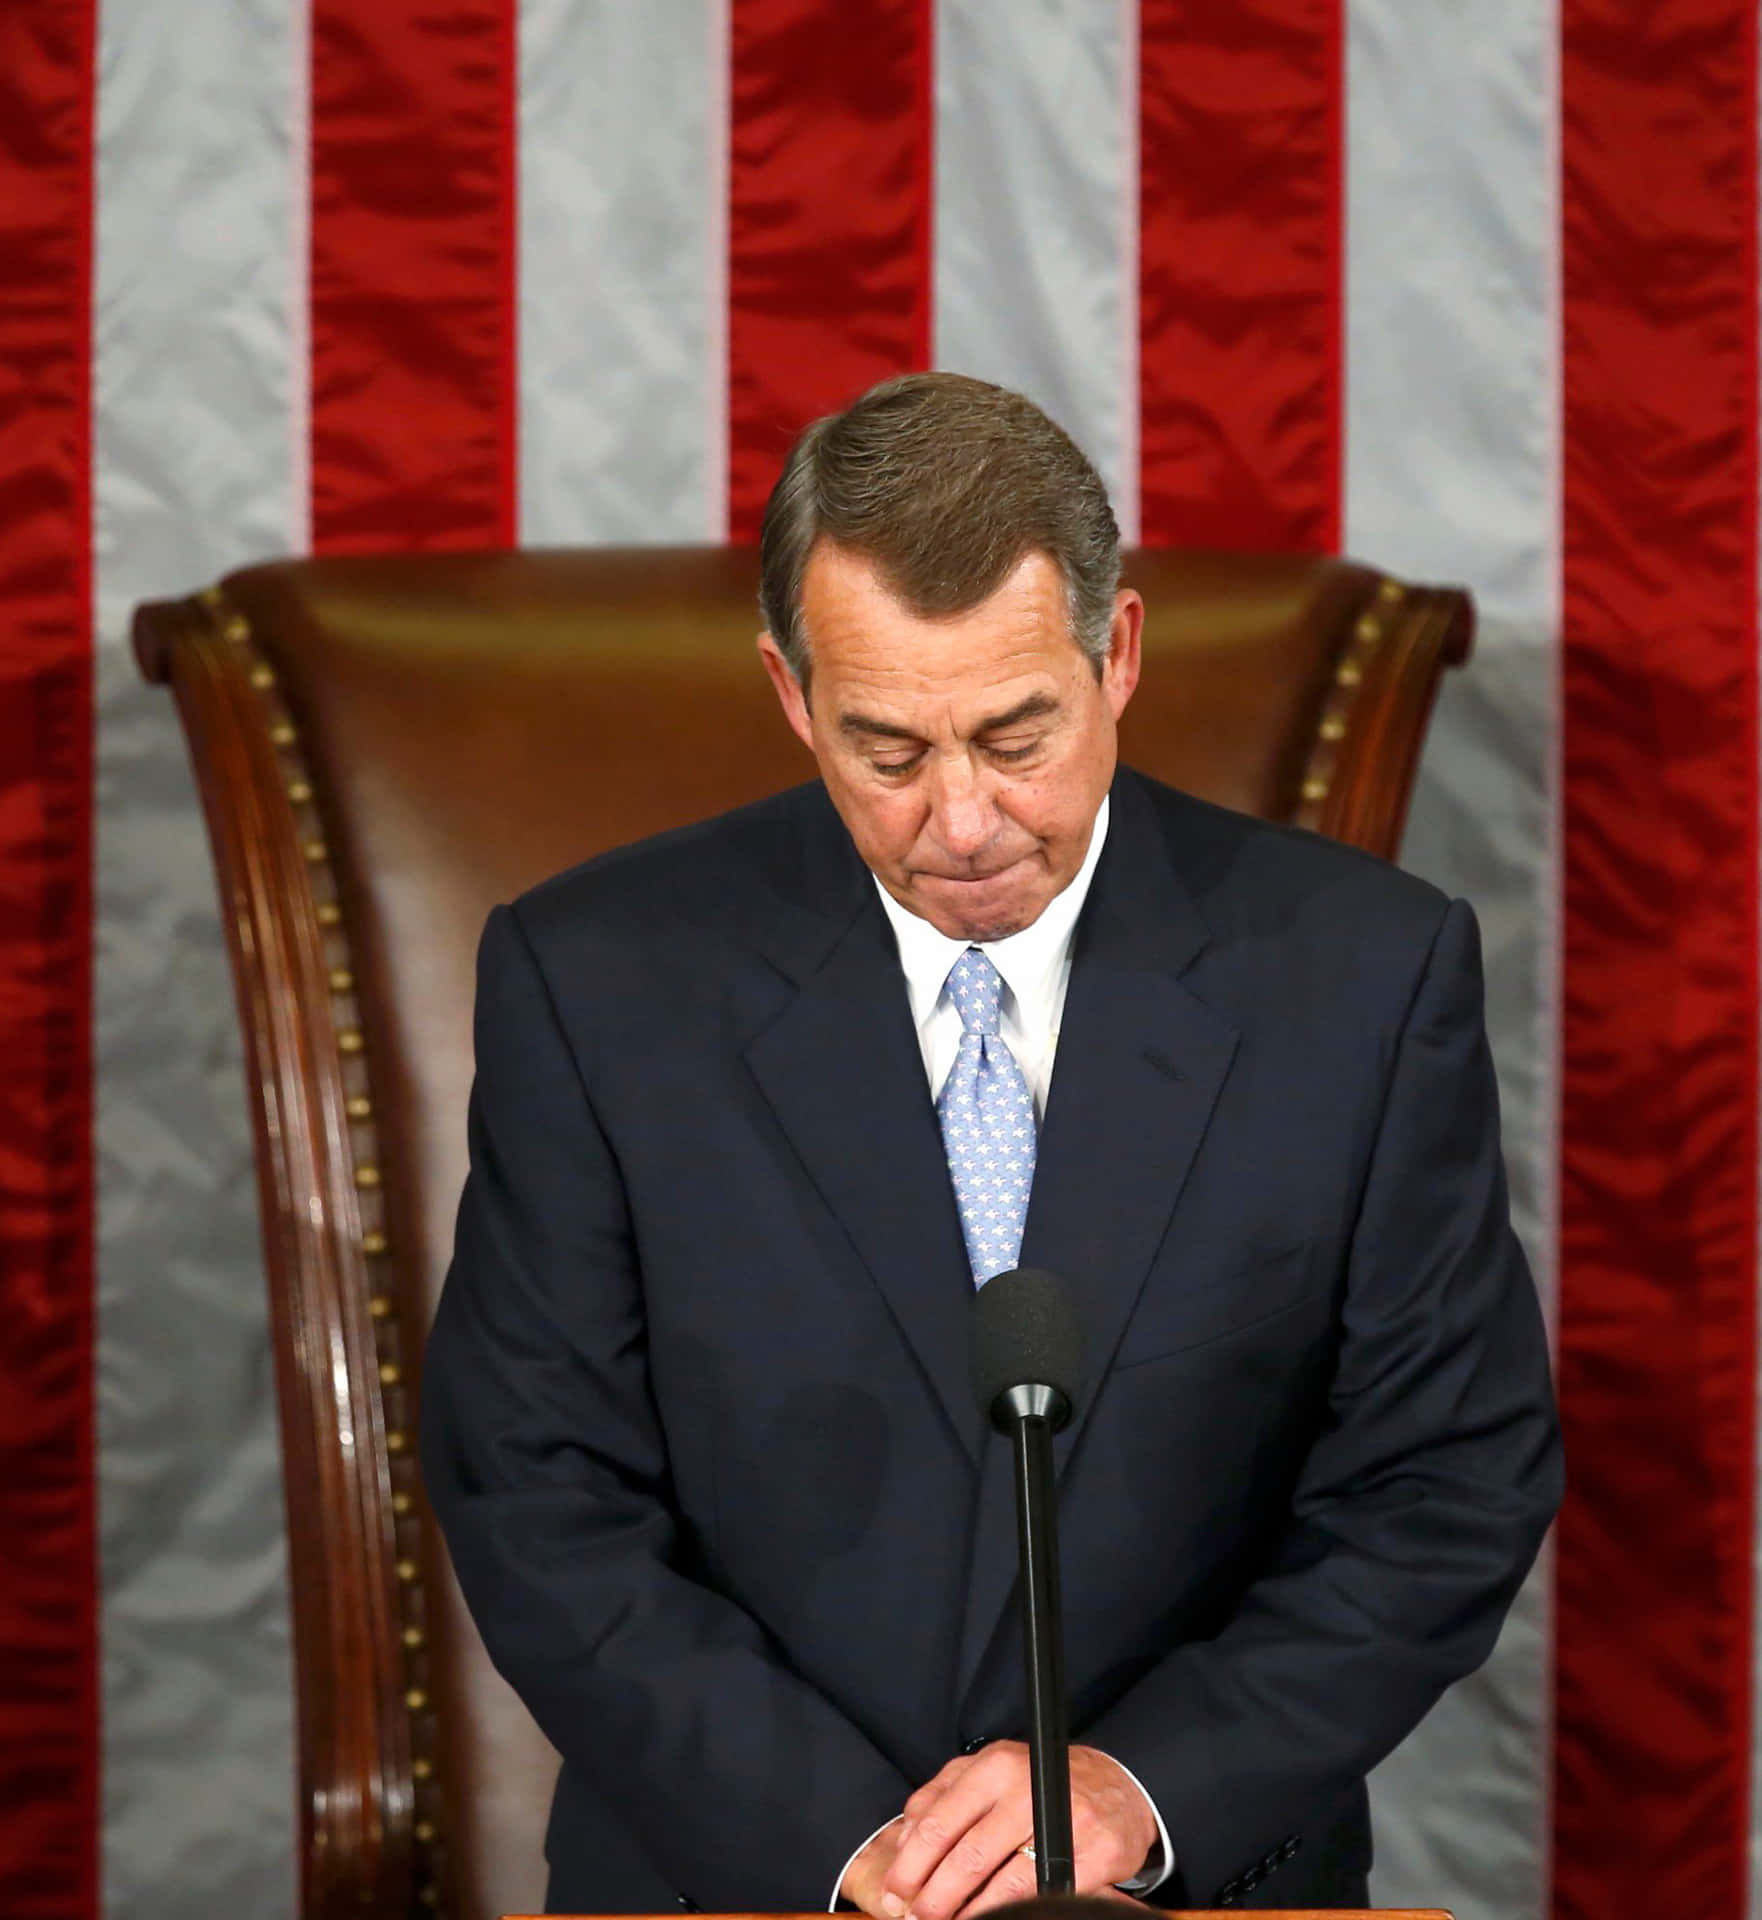 A Thoughtful Moment with John Boehner Wallpaper